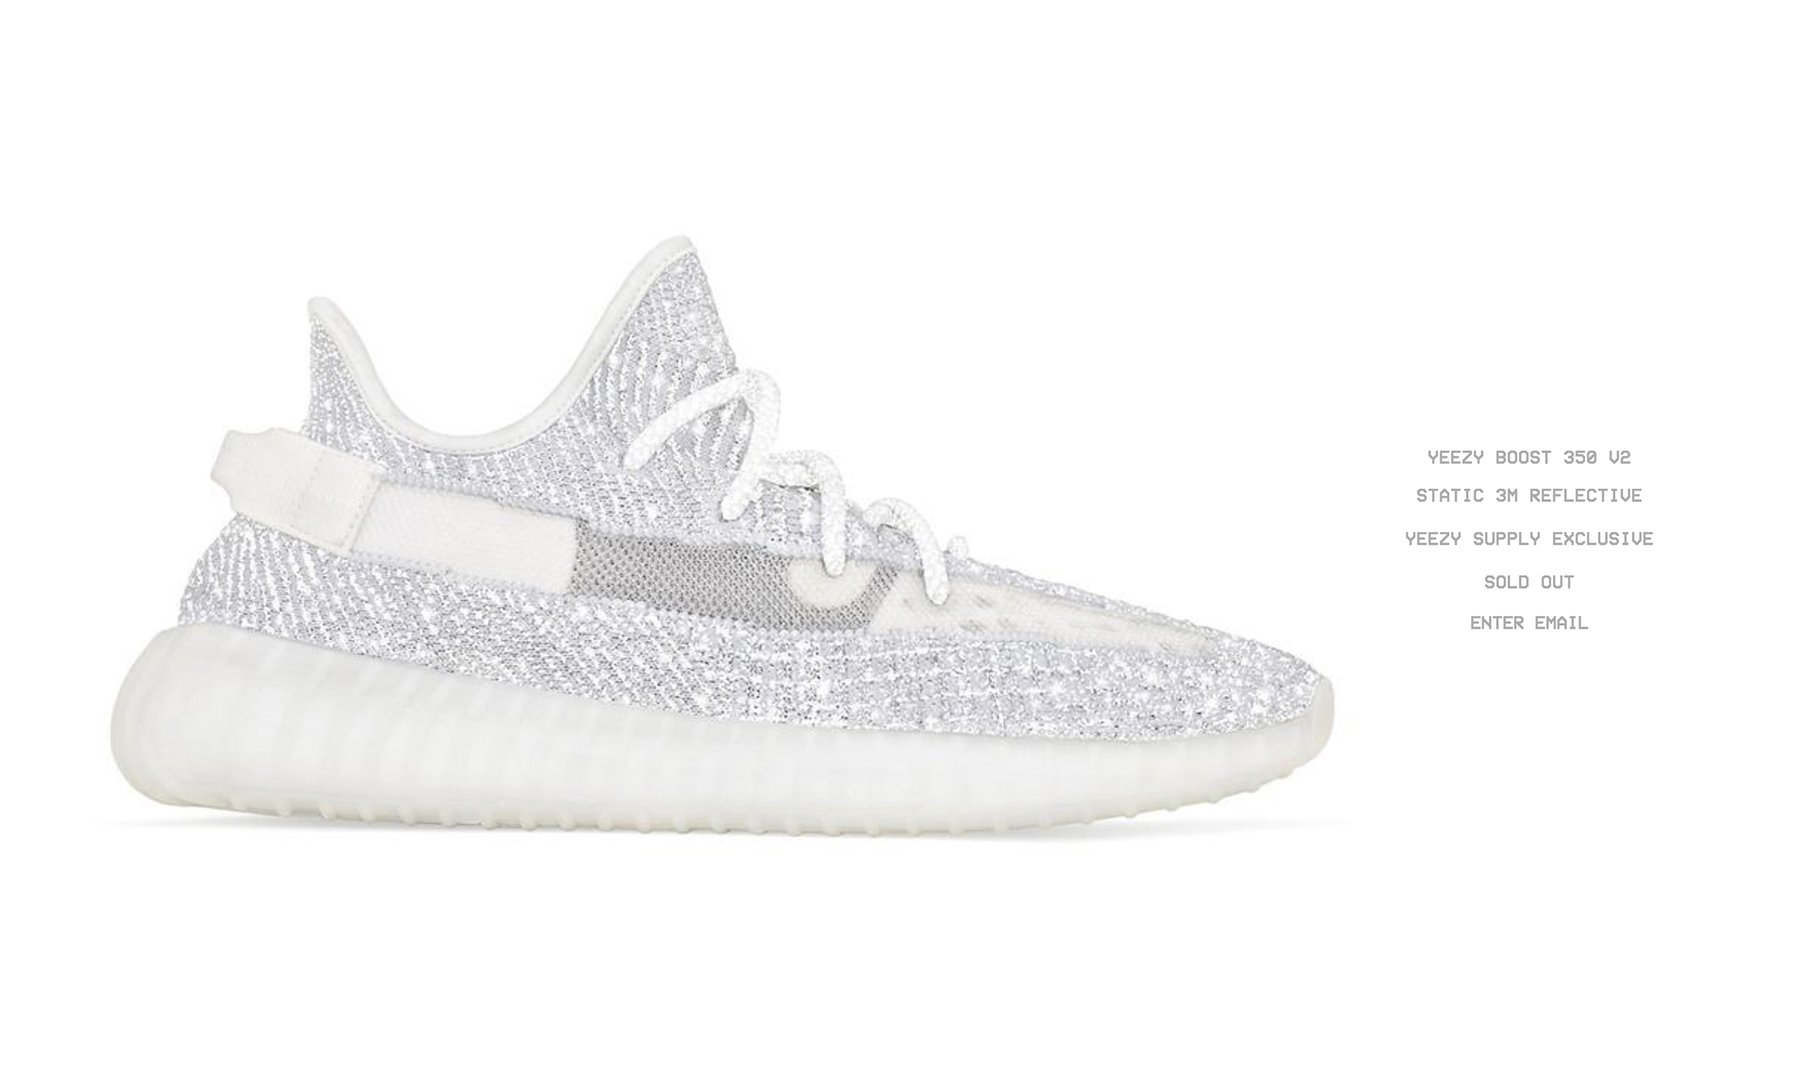 yeezy reflective sold out